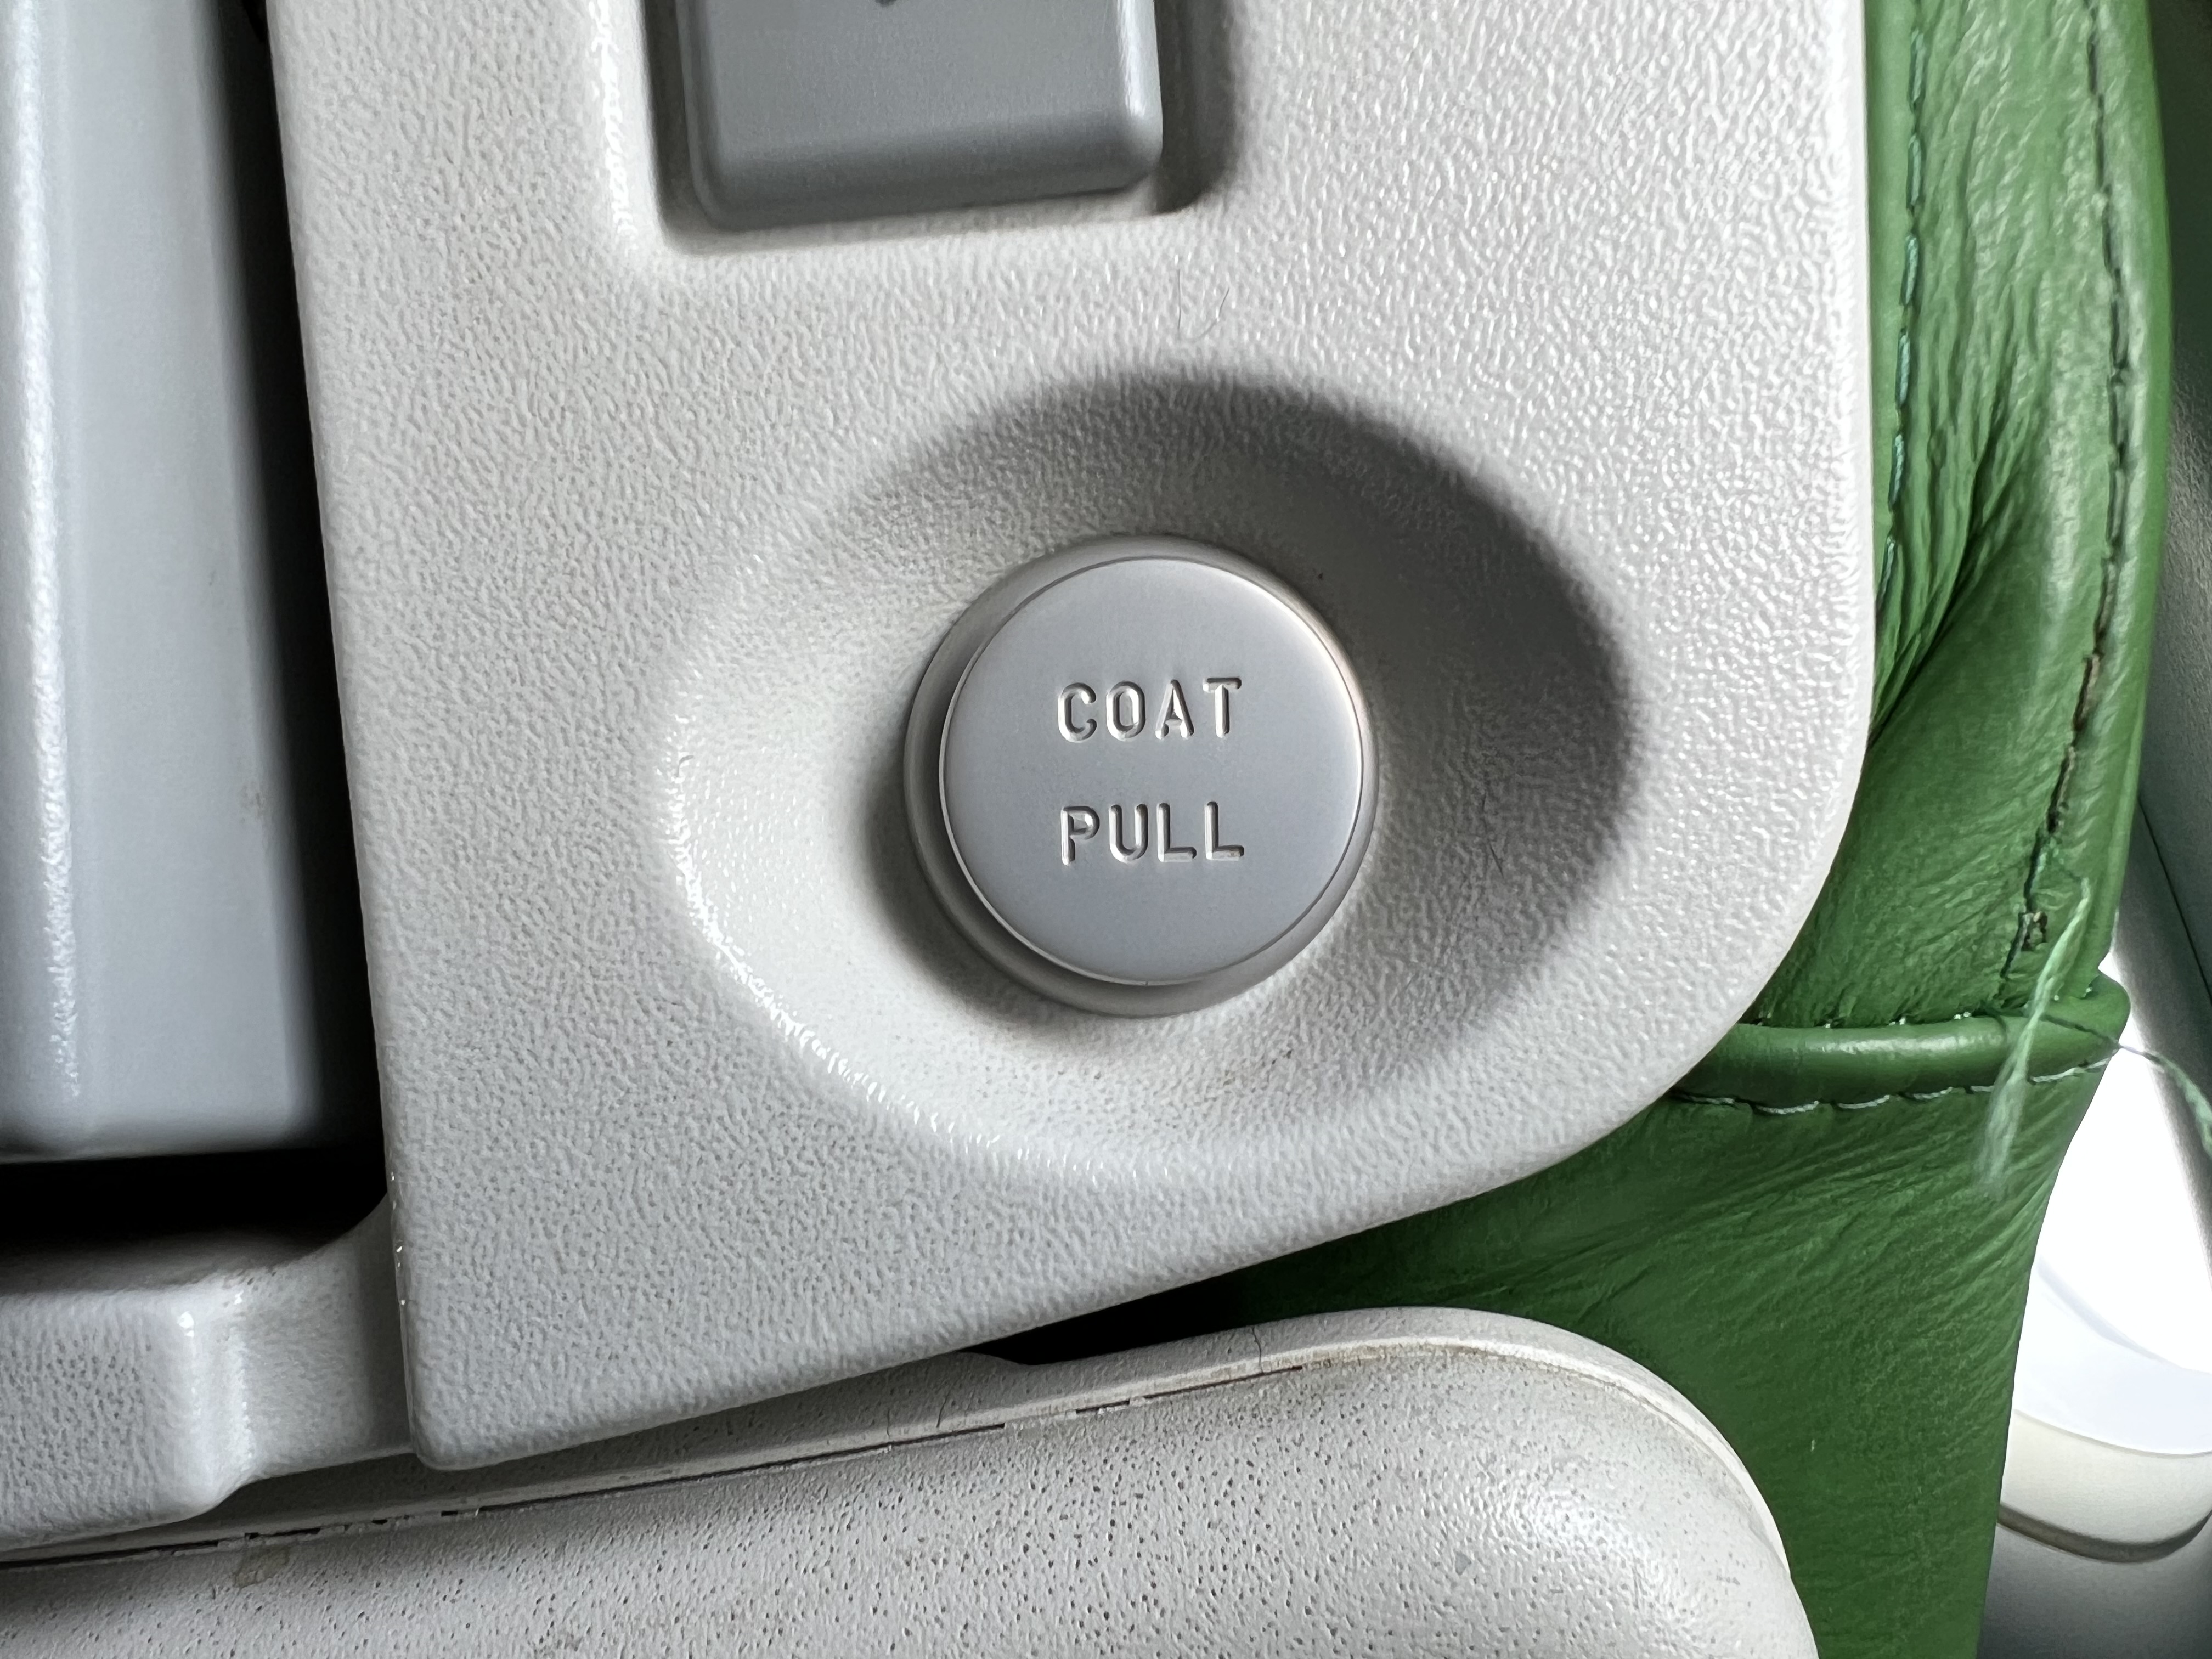 a button on a seat